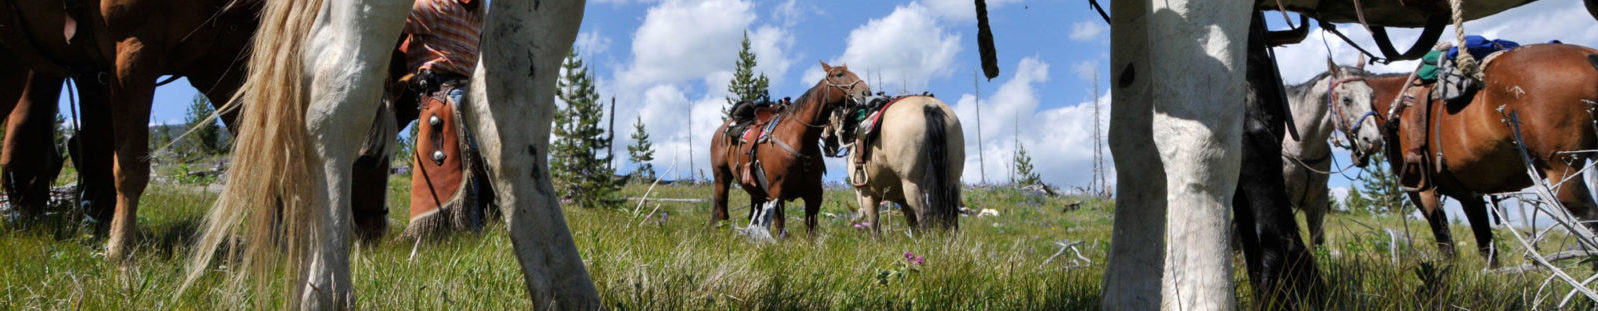 Horses in a Field - Yellowstone horseback riding trips